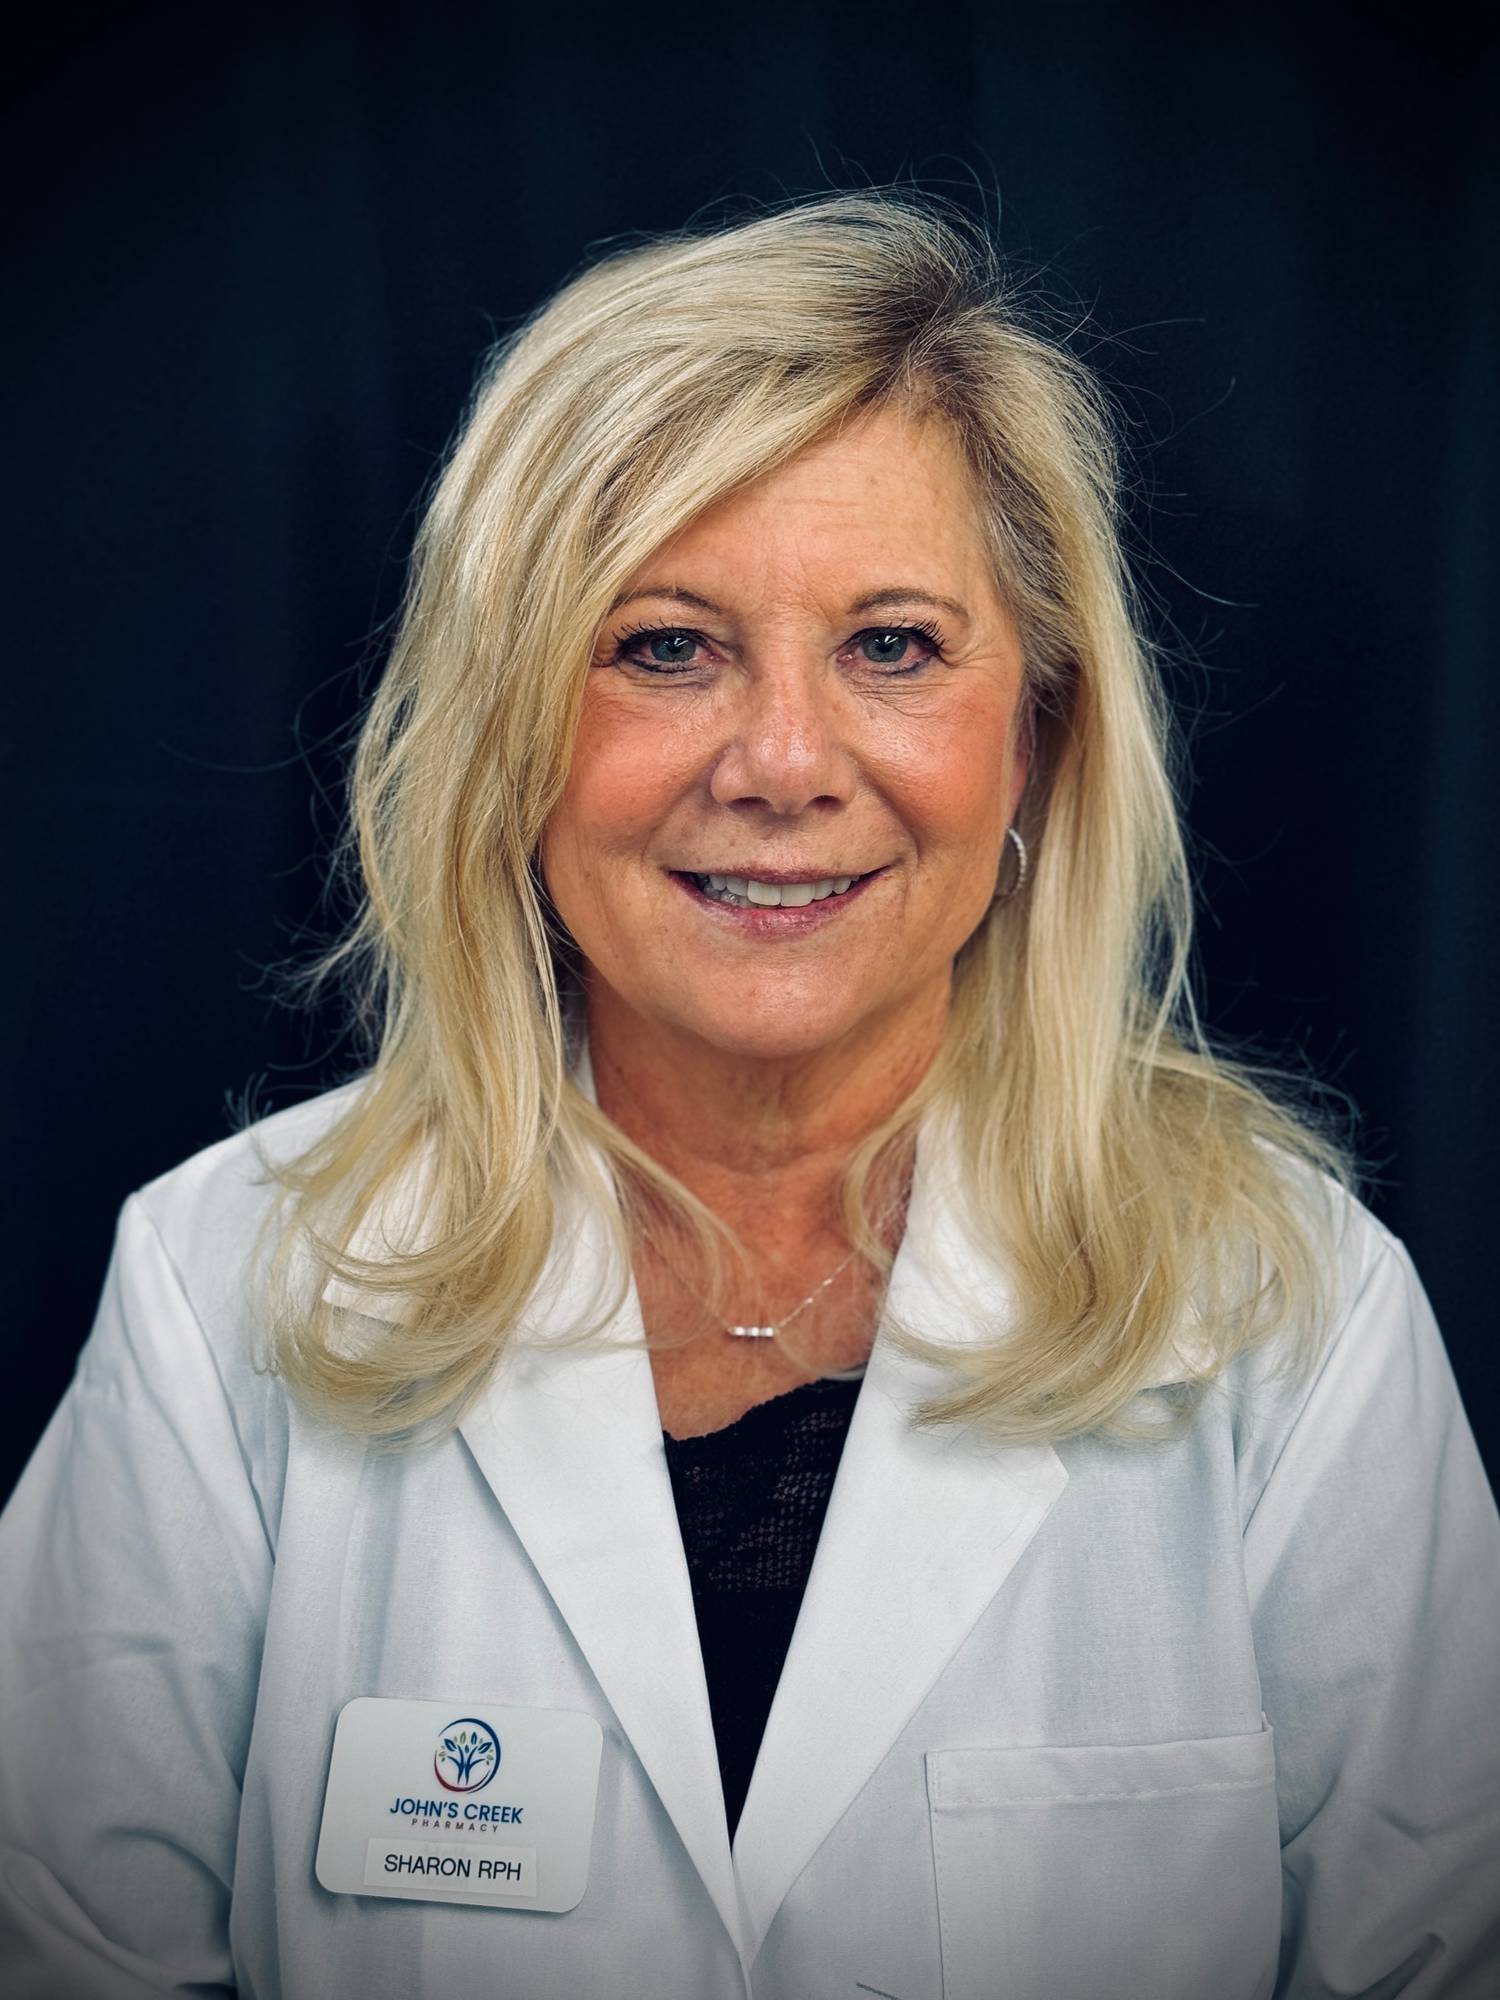 Dr. Sharon is one of our highly experienced pharmacist at John's Creek Pharmacy